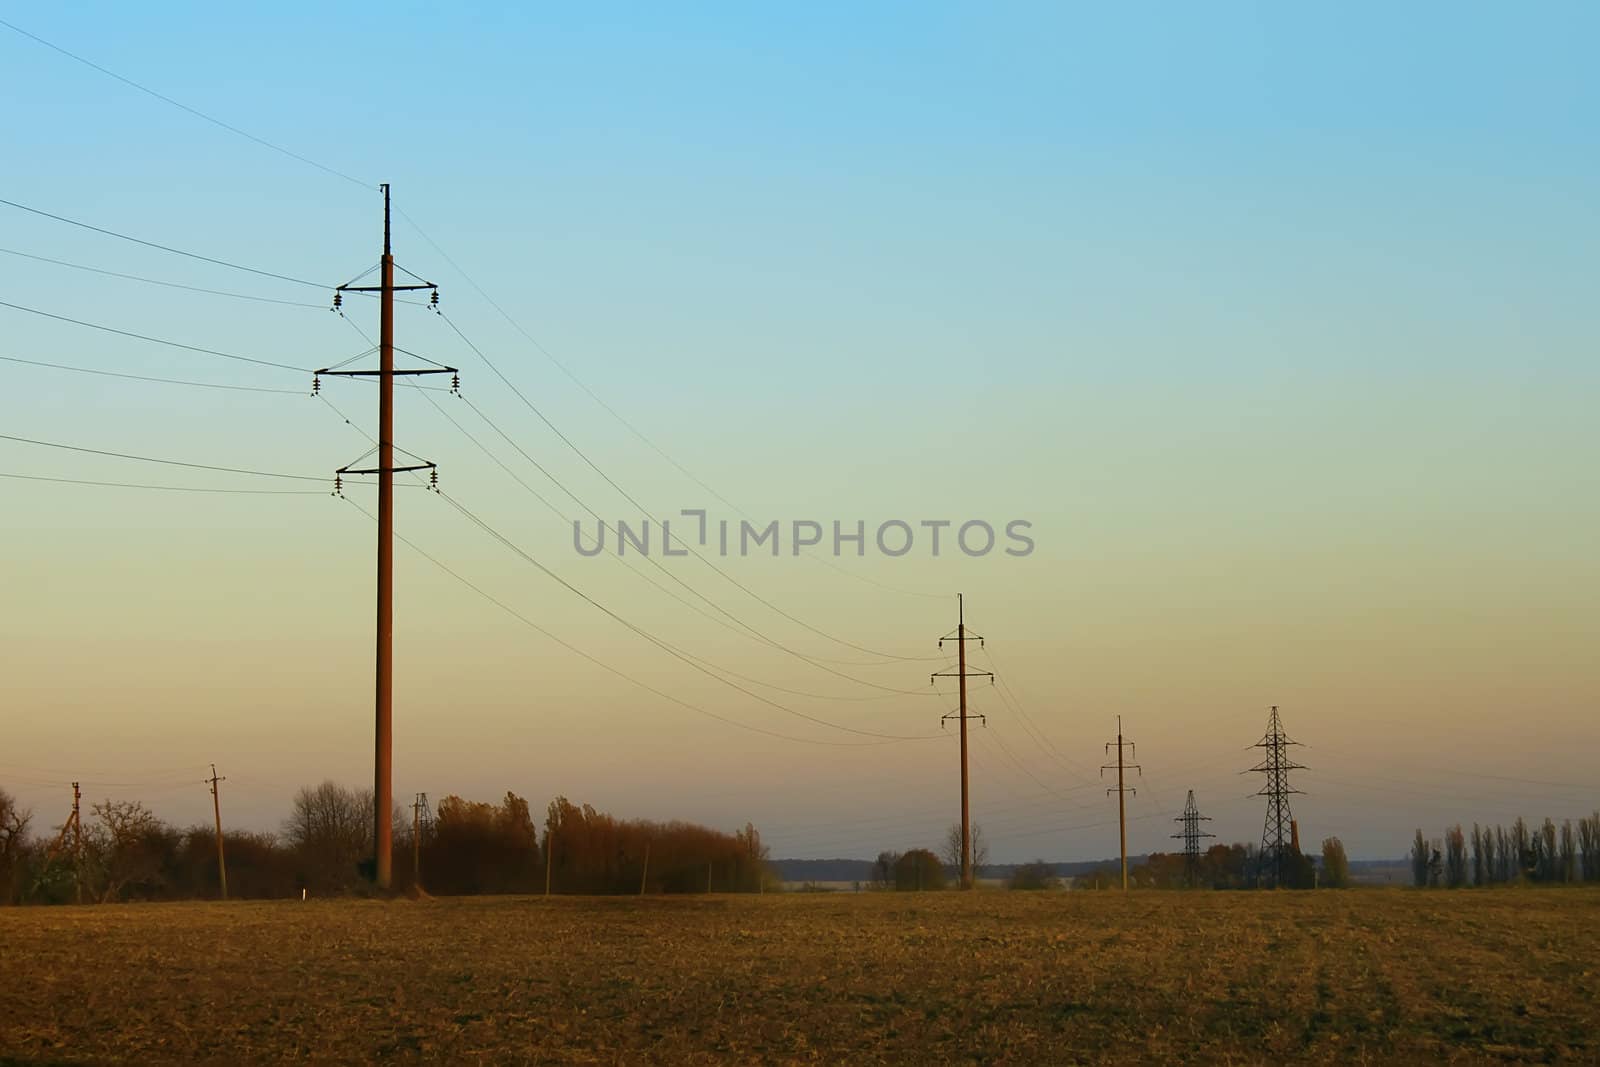 Pylons in the countryside. Autumn, the setting time